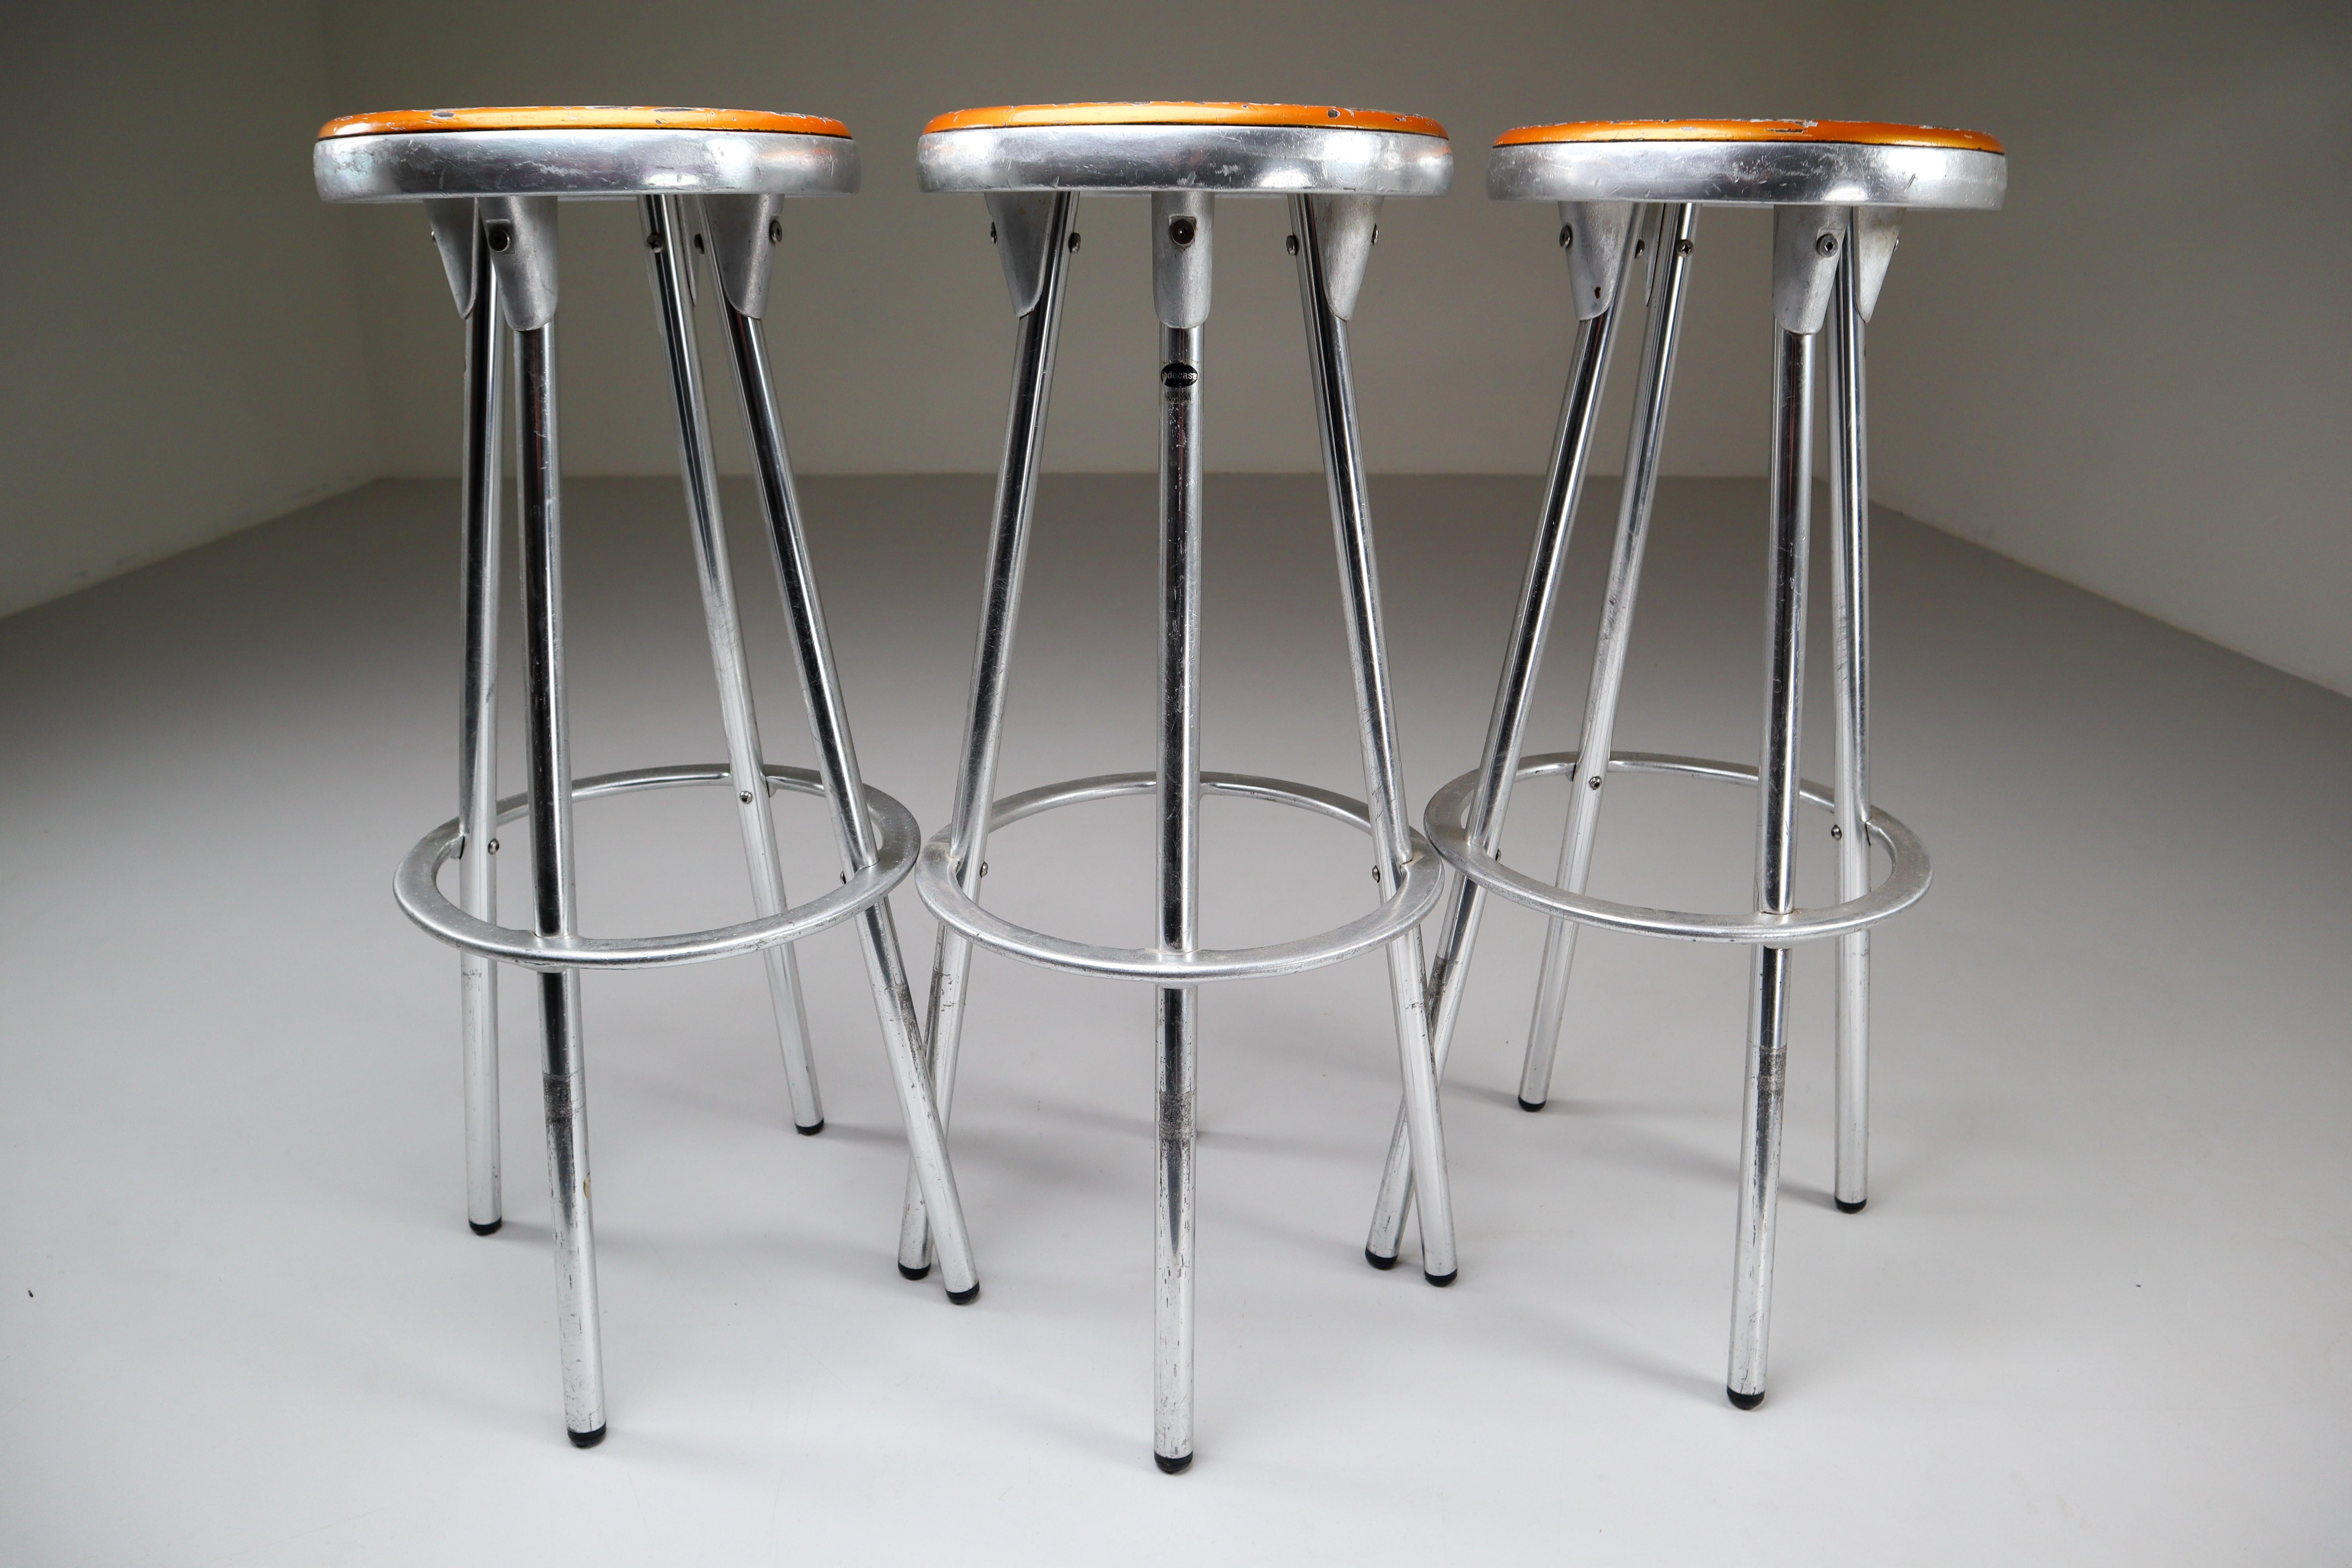 3 Industrial Bar Stools in Aluminum by Joan Casas Y Ortinez for Indecasa Spain 2